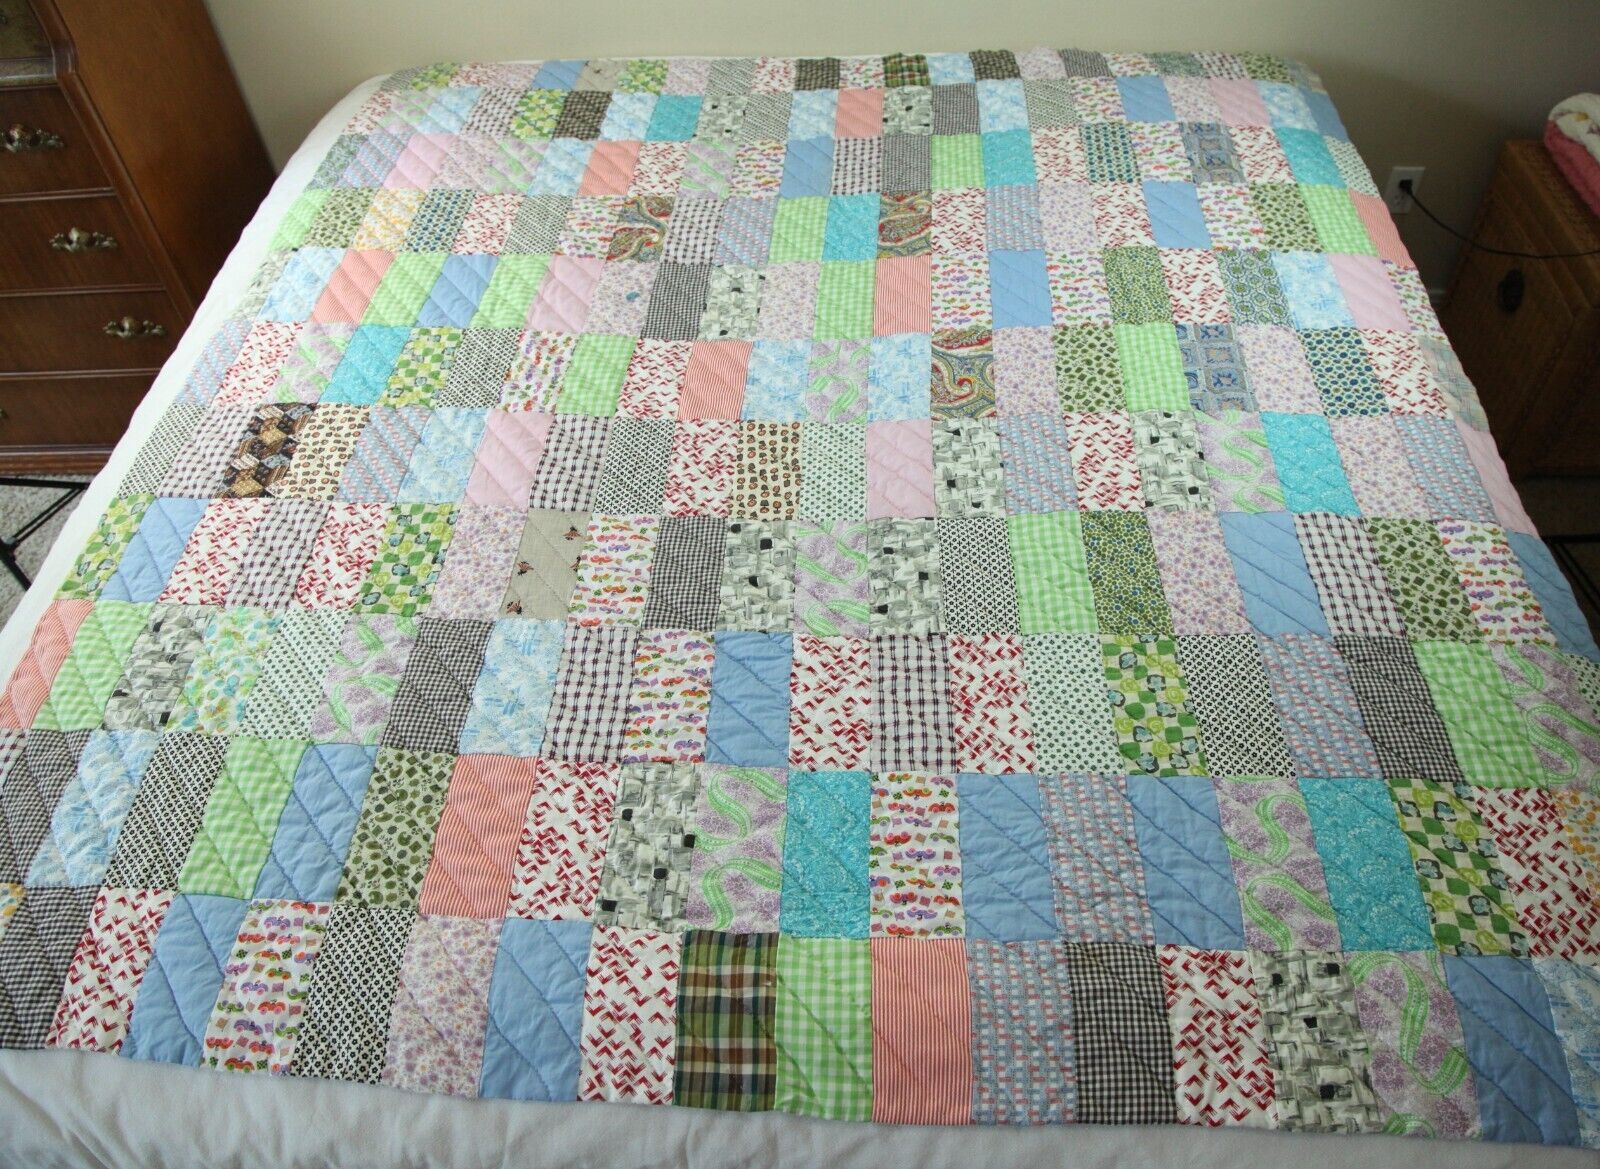 FLAW Vintage Novelty Print Colorful Scrappy Patchwork Quilt 77